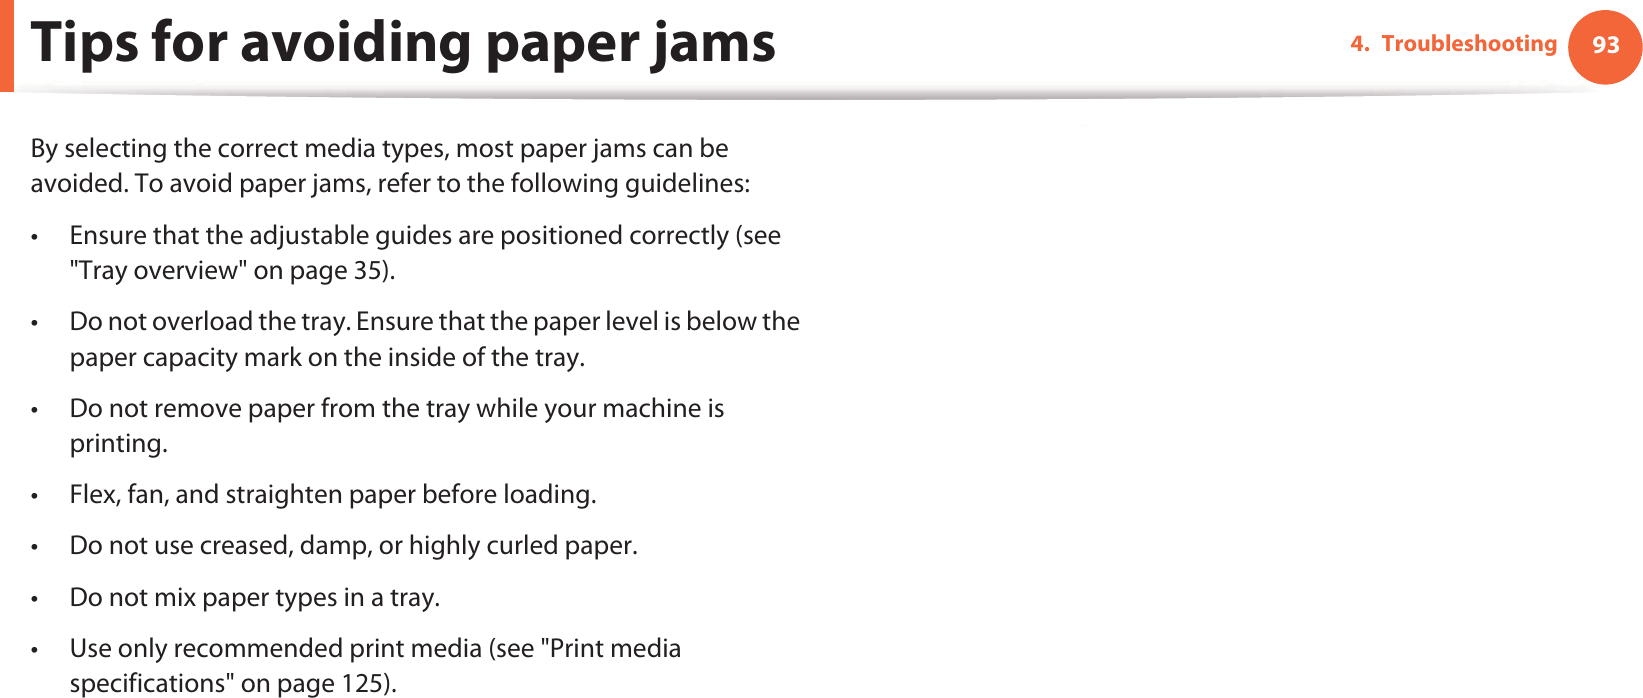 934. TroubleshootingTips for avoiding paper jamsBy selecting the correct media types, most paper jams can be avoided. To avoid paper jams, refer to the following guidelines:• Ensure that the adjustable guides are positioned correctly (see &quot;Tray overview&quot; on page 35).• Do not overload the tray. Ensure that the paper level is below the paper capacity mark on the inside of the tray.• Do not remove paper from the tray while your machine is printing.• Flex, fan, and straighten paper before loading. • Do not use creased, damp, or highly curled paper.• Do not mix paper types in a tray.• Use only recommended print media (see &quot;Print media specifications&quot; on page 125).